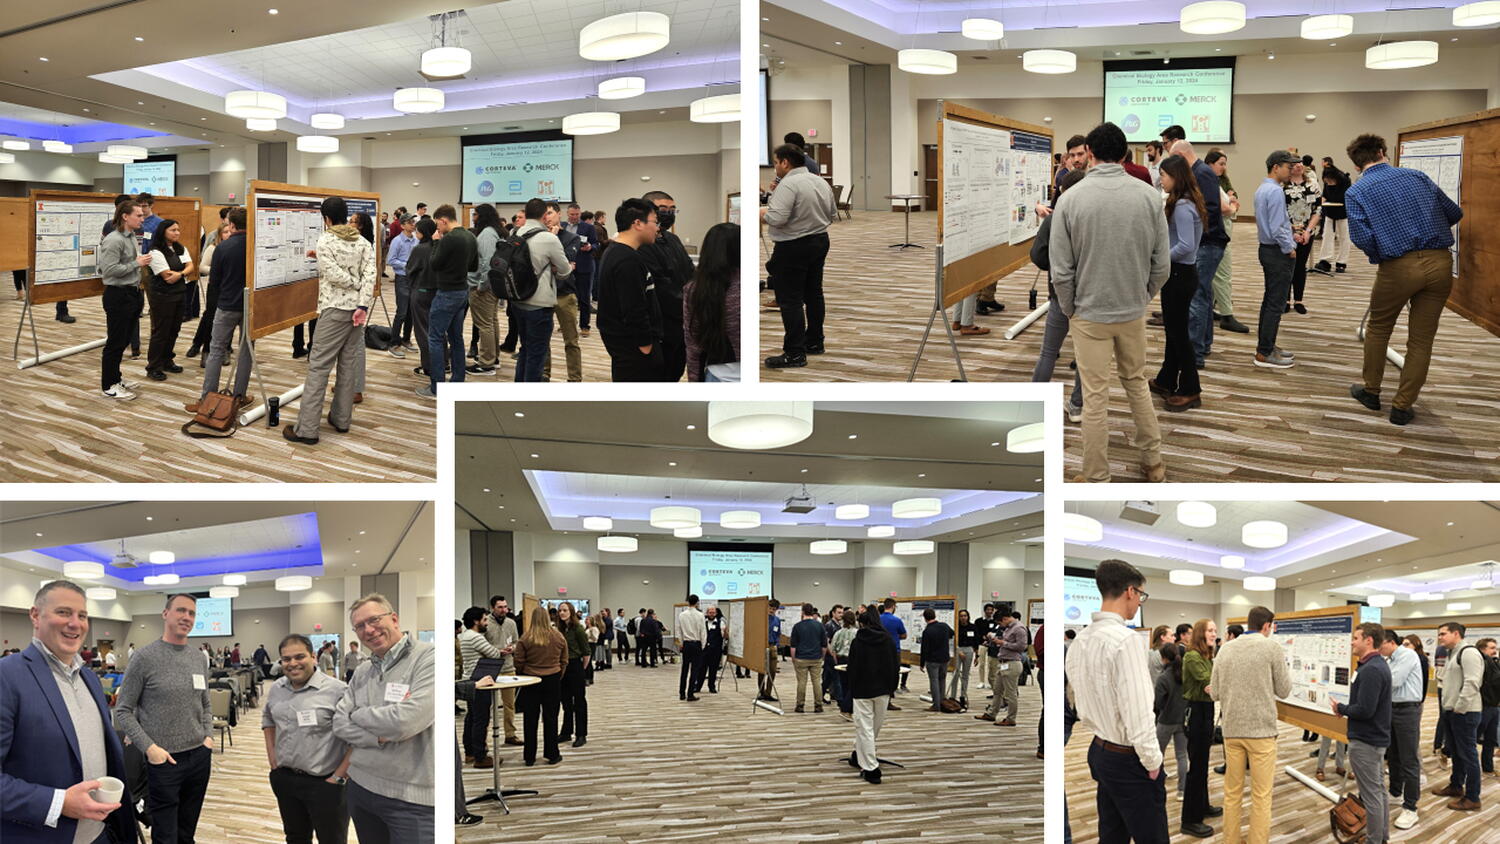 Five photos showing people standing in a large room listening to several students present next to posters illustrating their research projects.